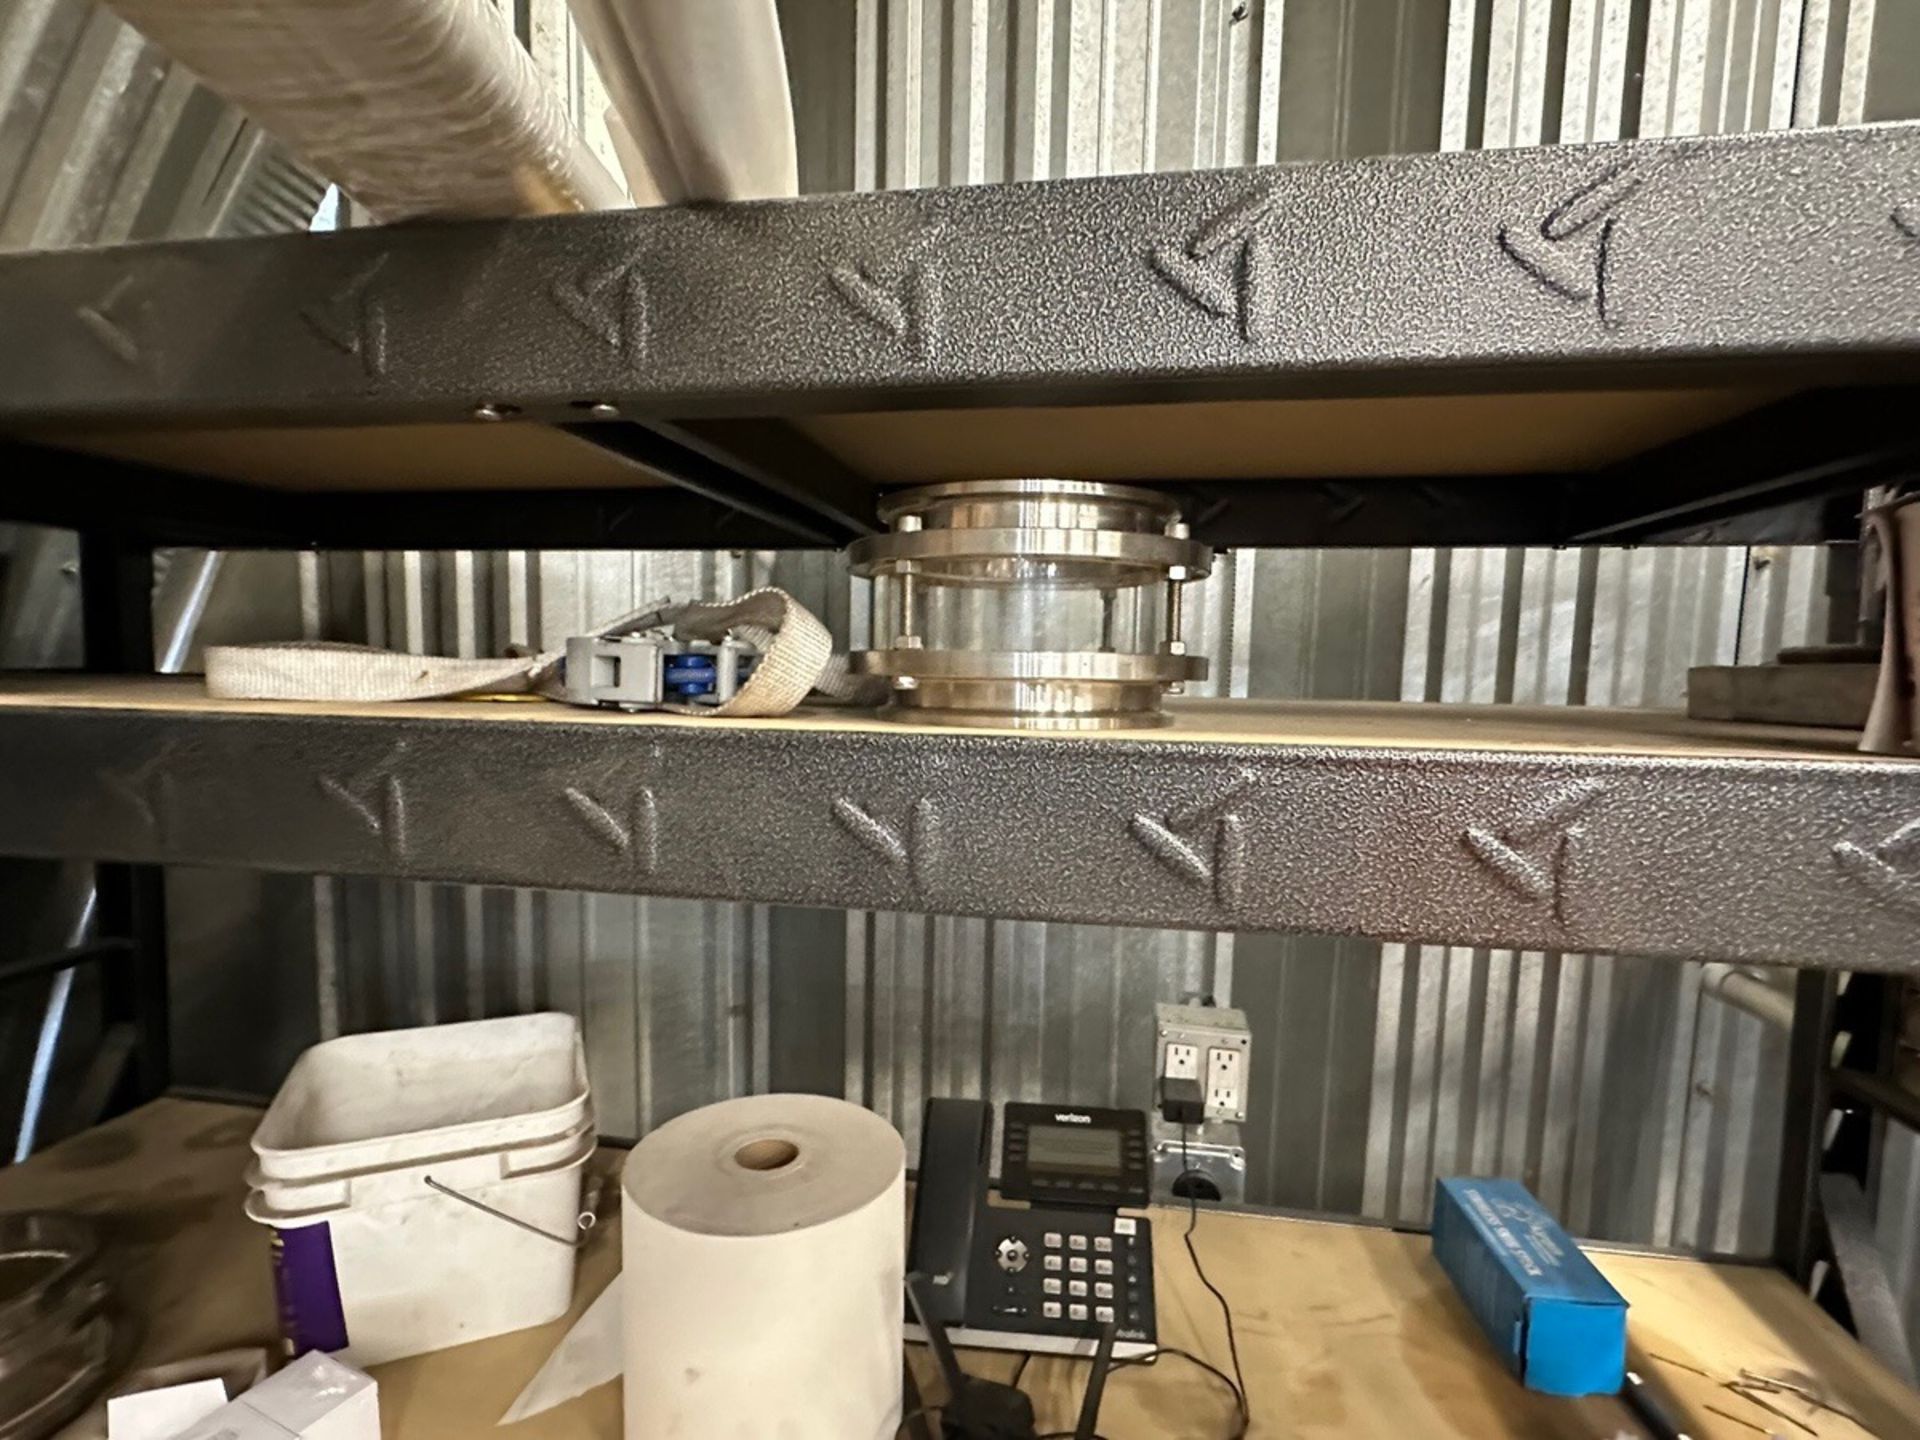 Shelf With Contents, Stainless Steel Fittings | Rig Fee $125 - Image 3 of 9